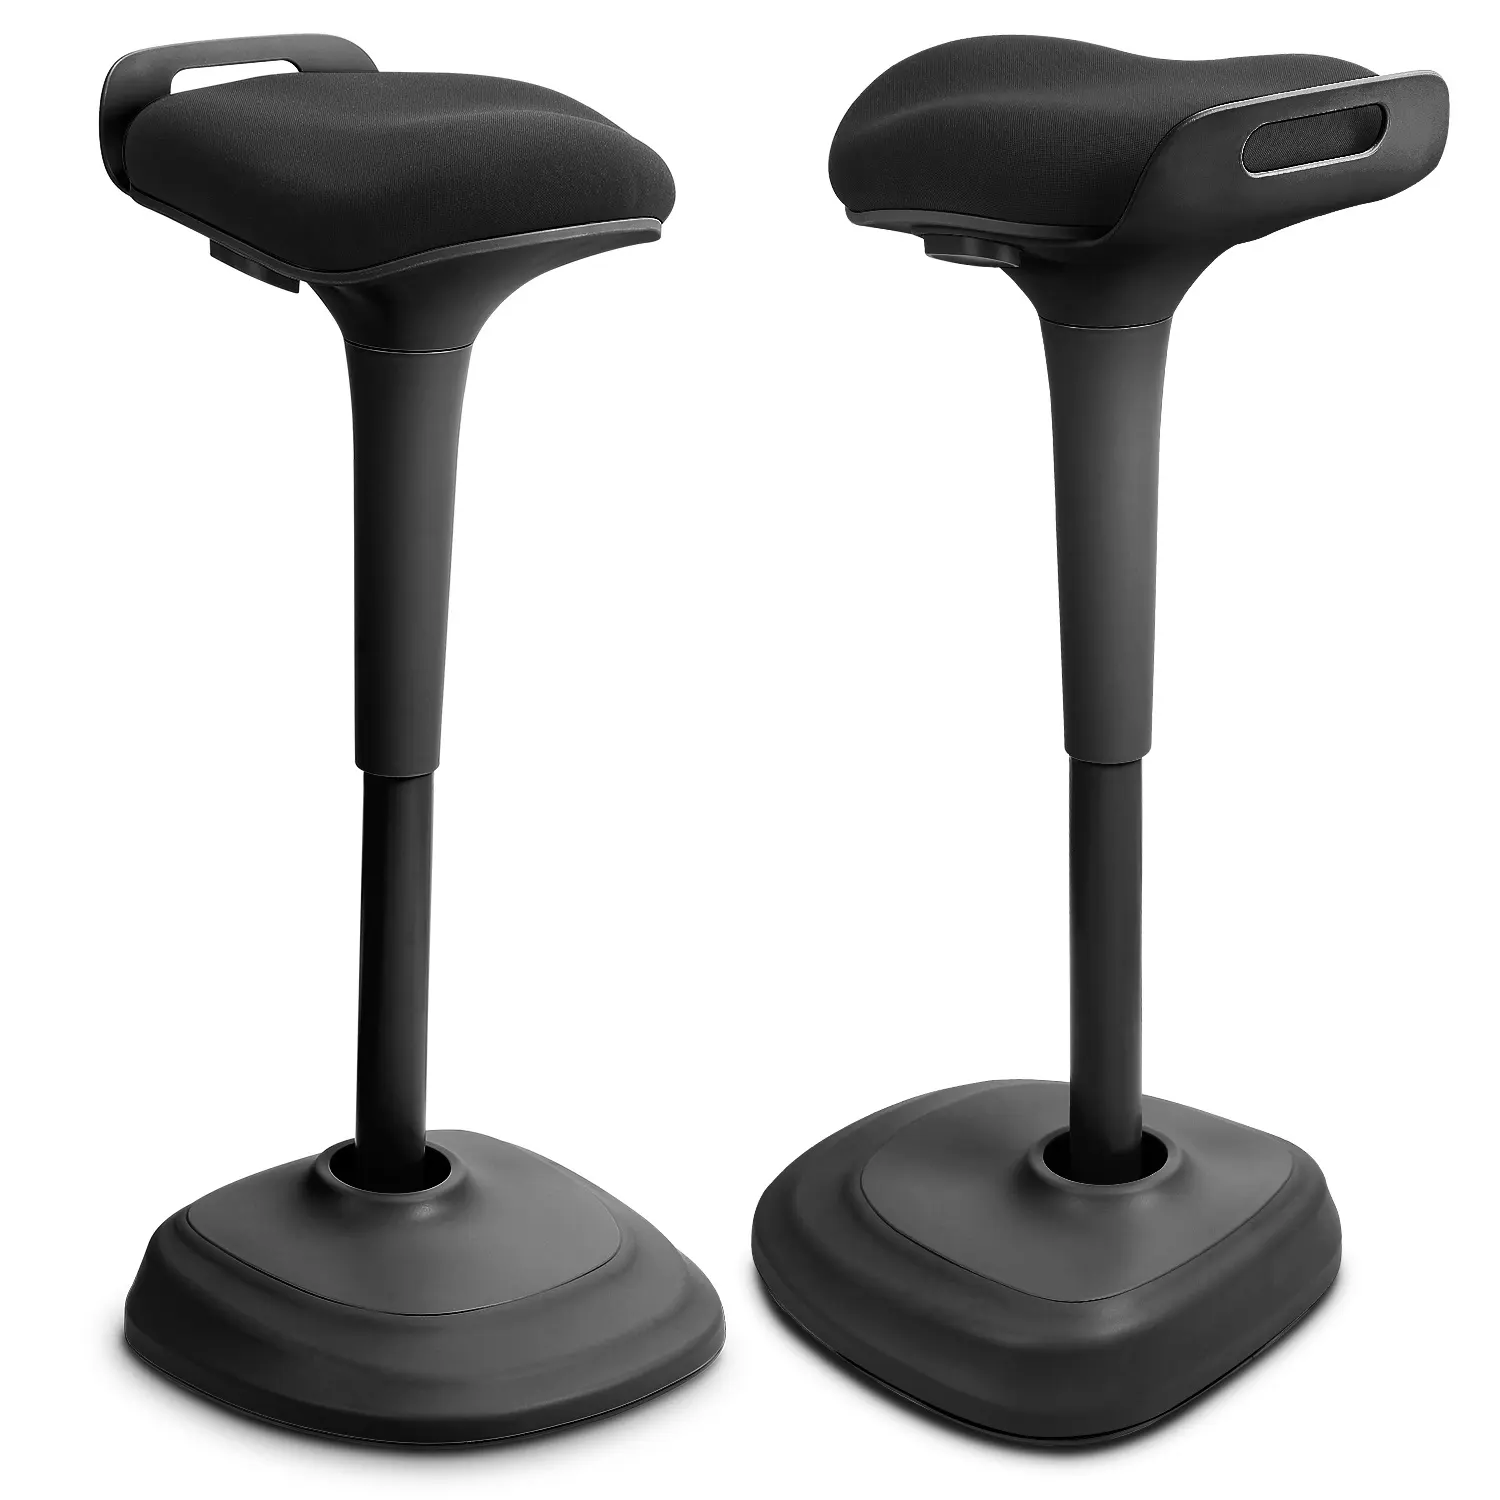 Wobbly Stool Office Ergonomic Chair Workspace Active Sitting Chair Wobble Stool